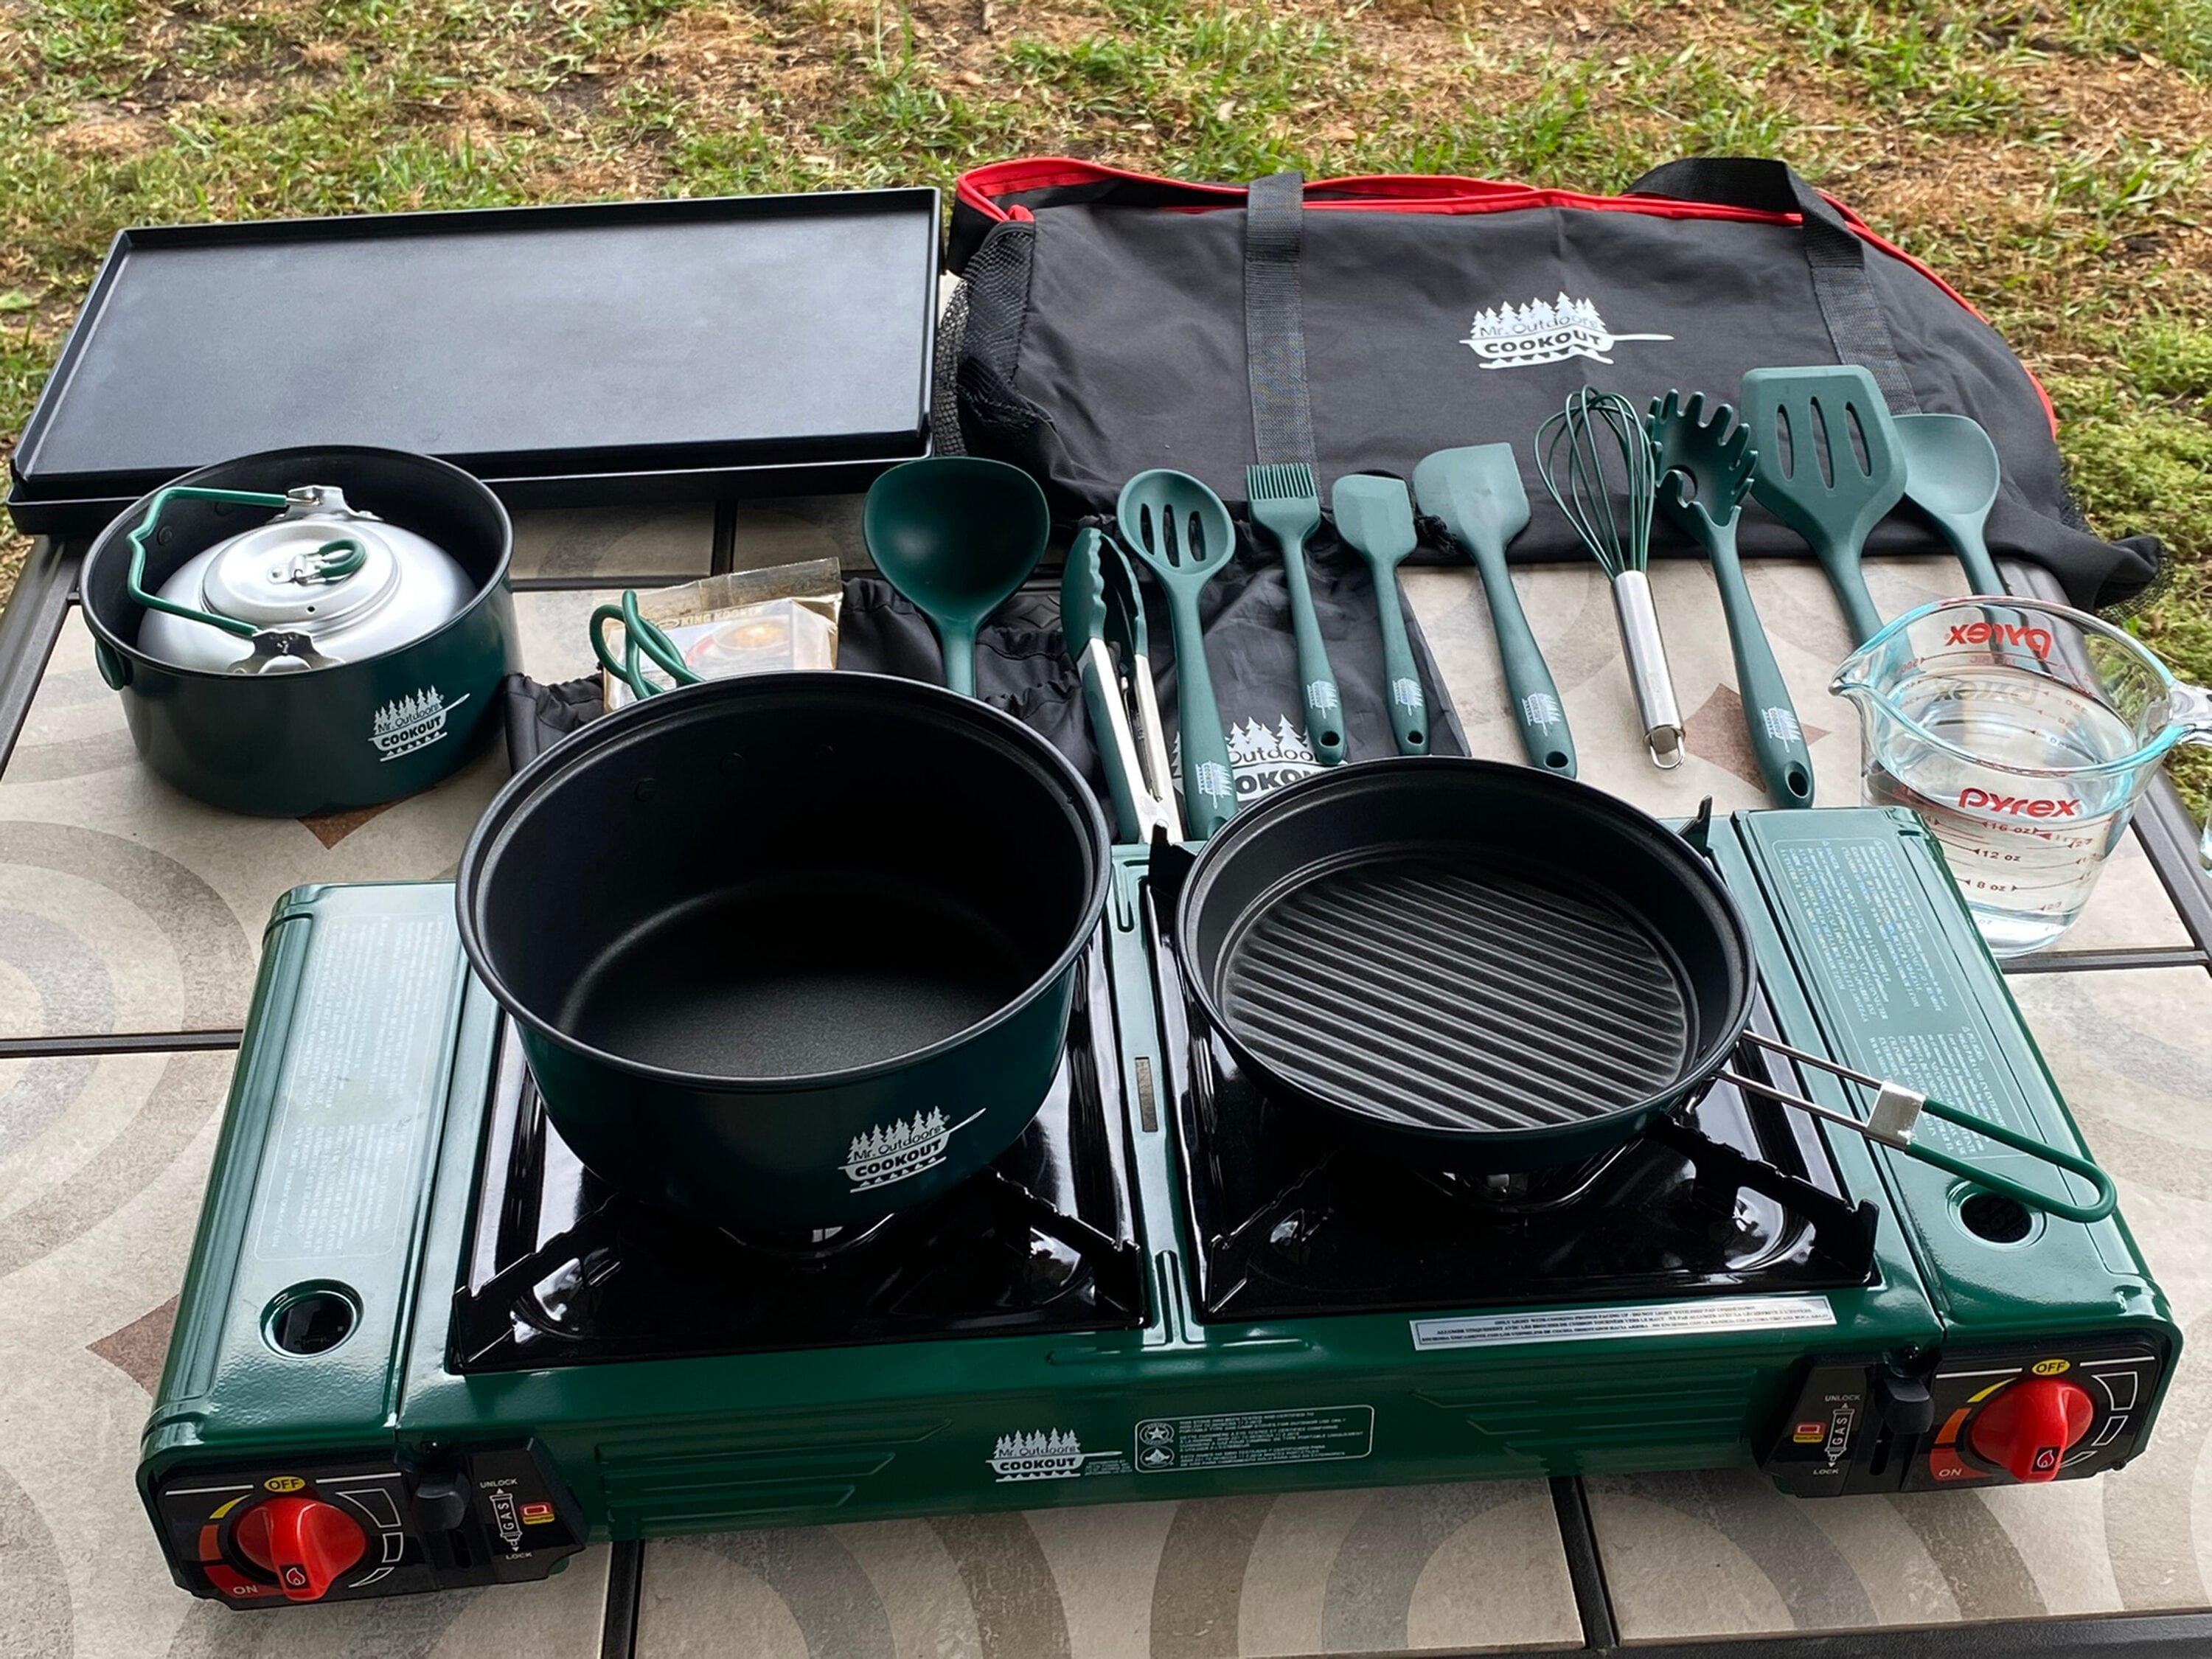 ELK Gray Aluminum Non-Stick Stock Pot Set with Mini Stove - 1 Quart  Capacity - Outdoor Cooking, Protective Handles, Camp Stove Included in the Cooking  Pots department at